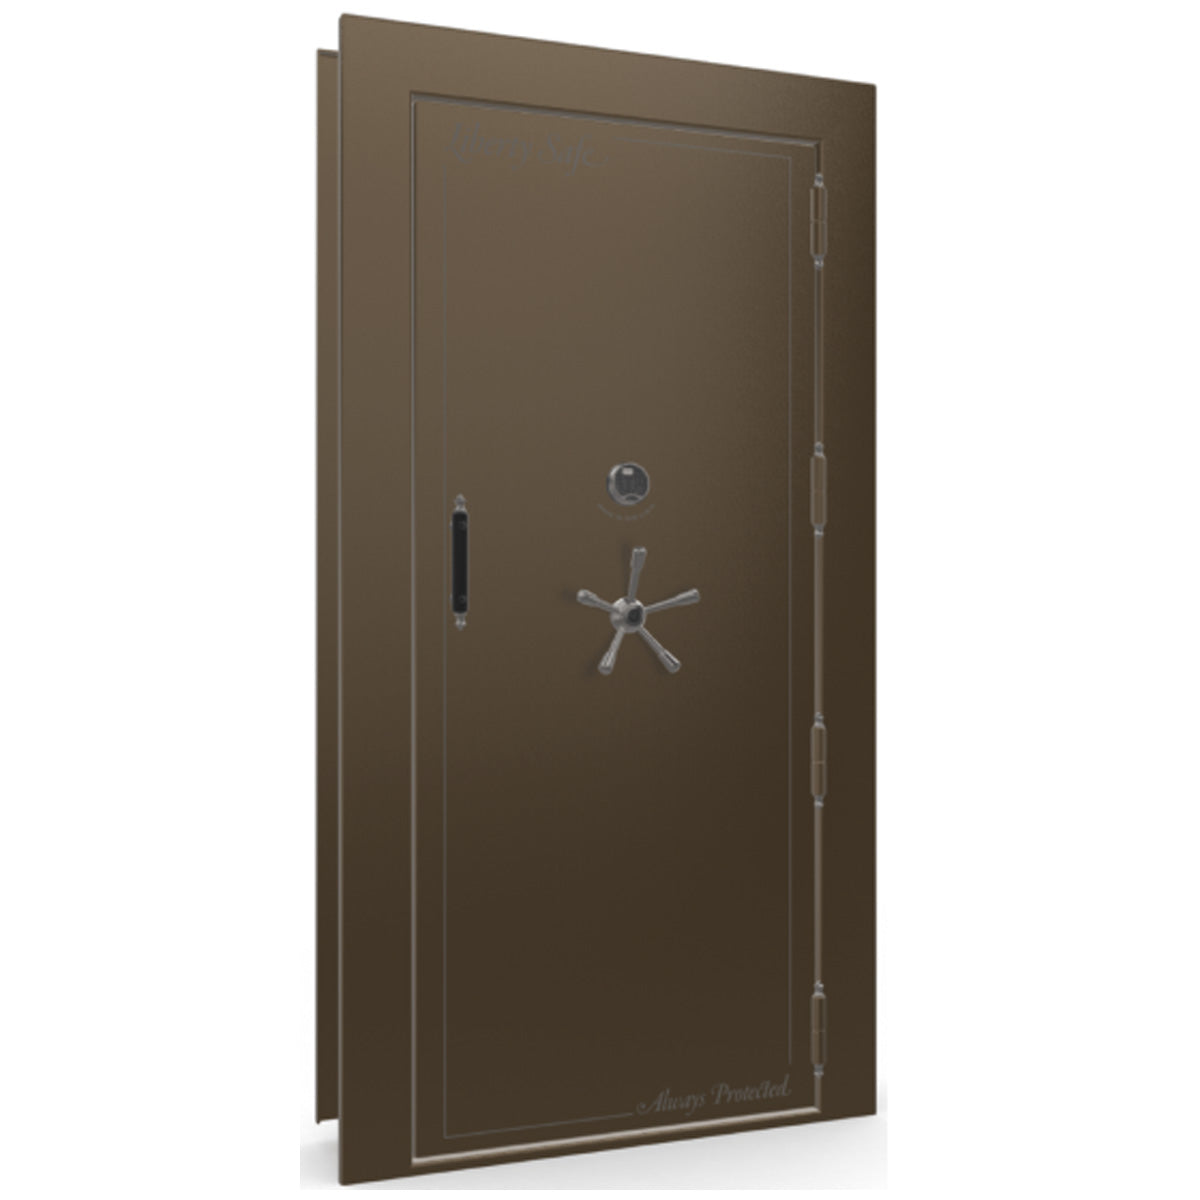 The Beast Vault Door in Bronze Gloss with Black Chrome Electronic Lock, Right Outswing, door closed.